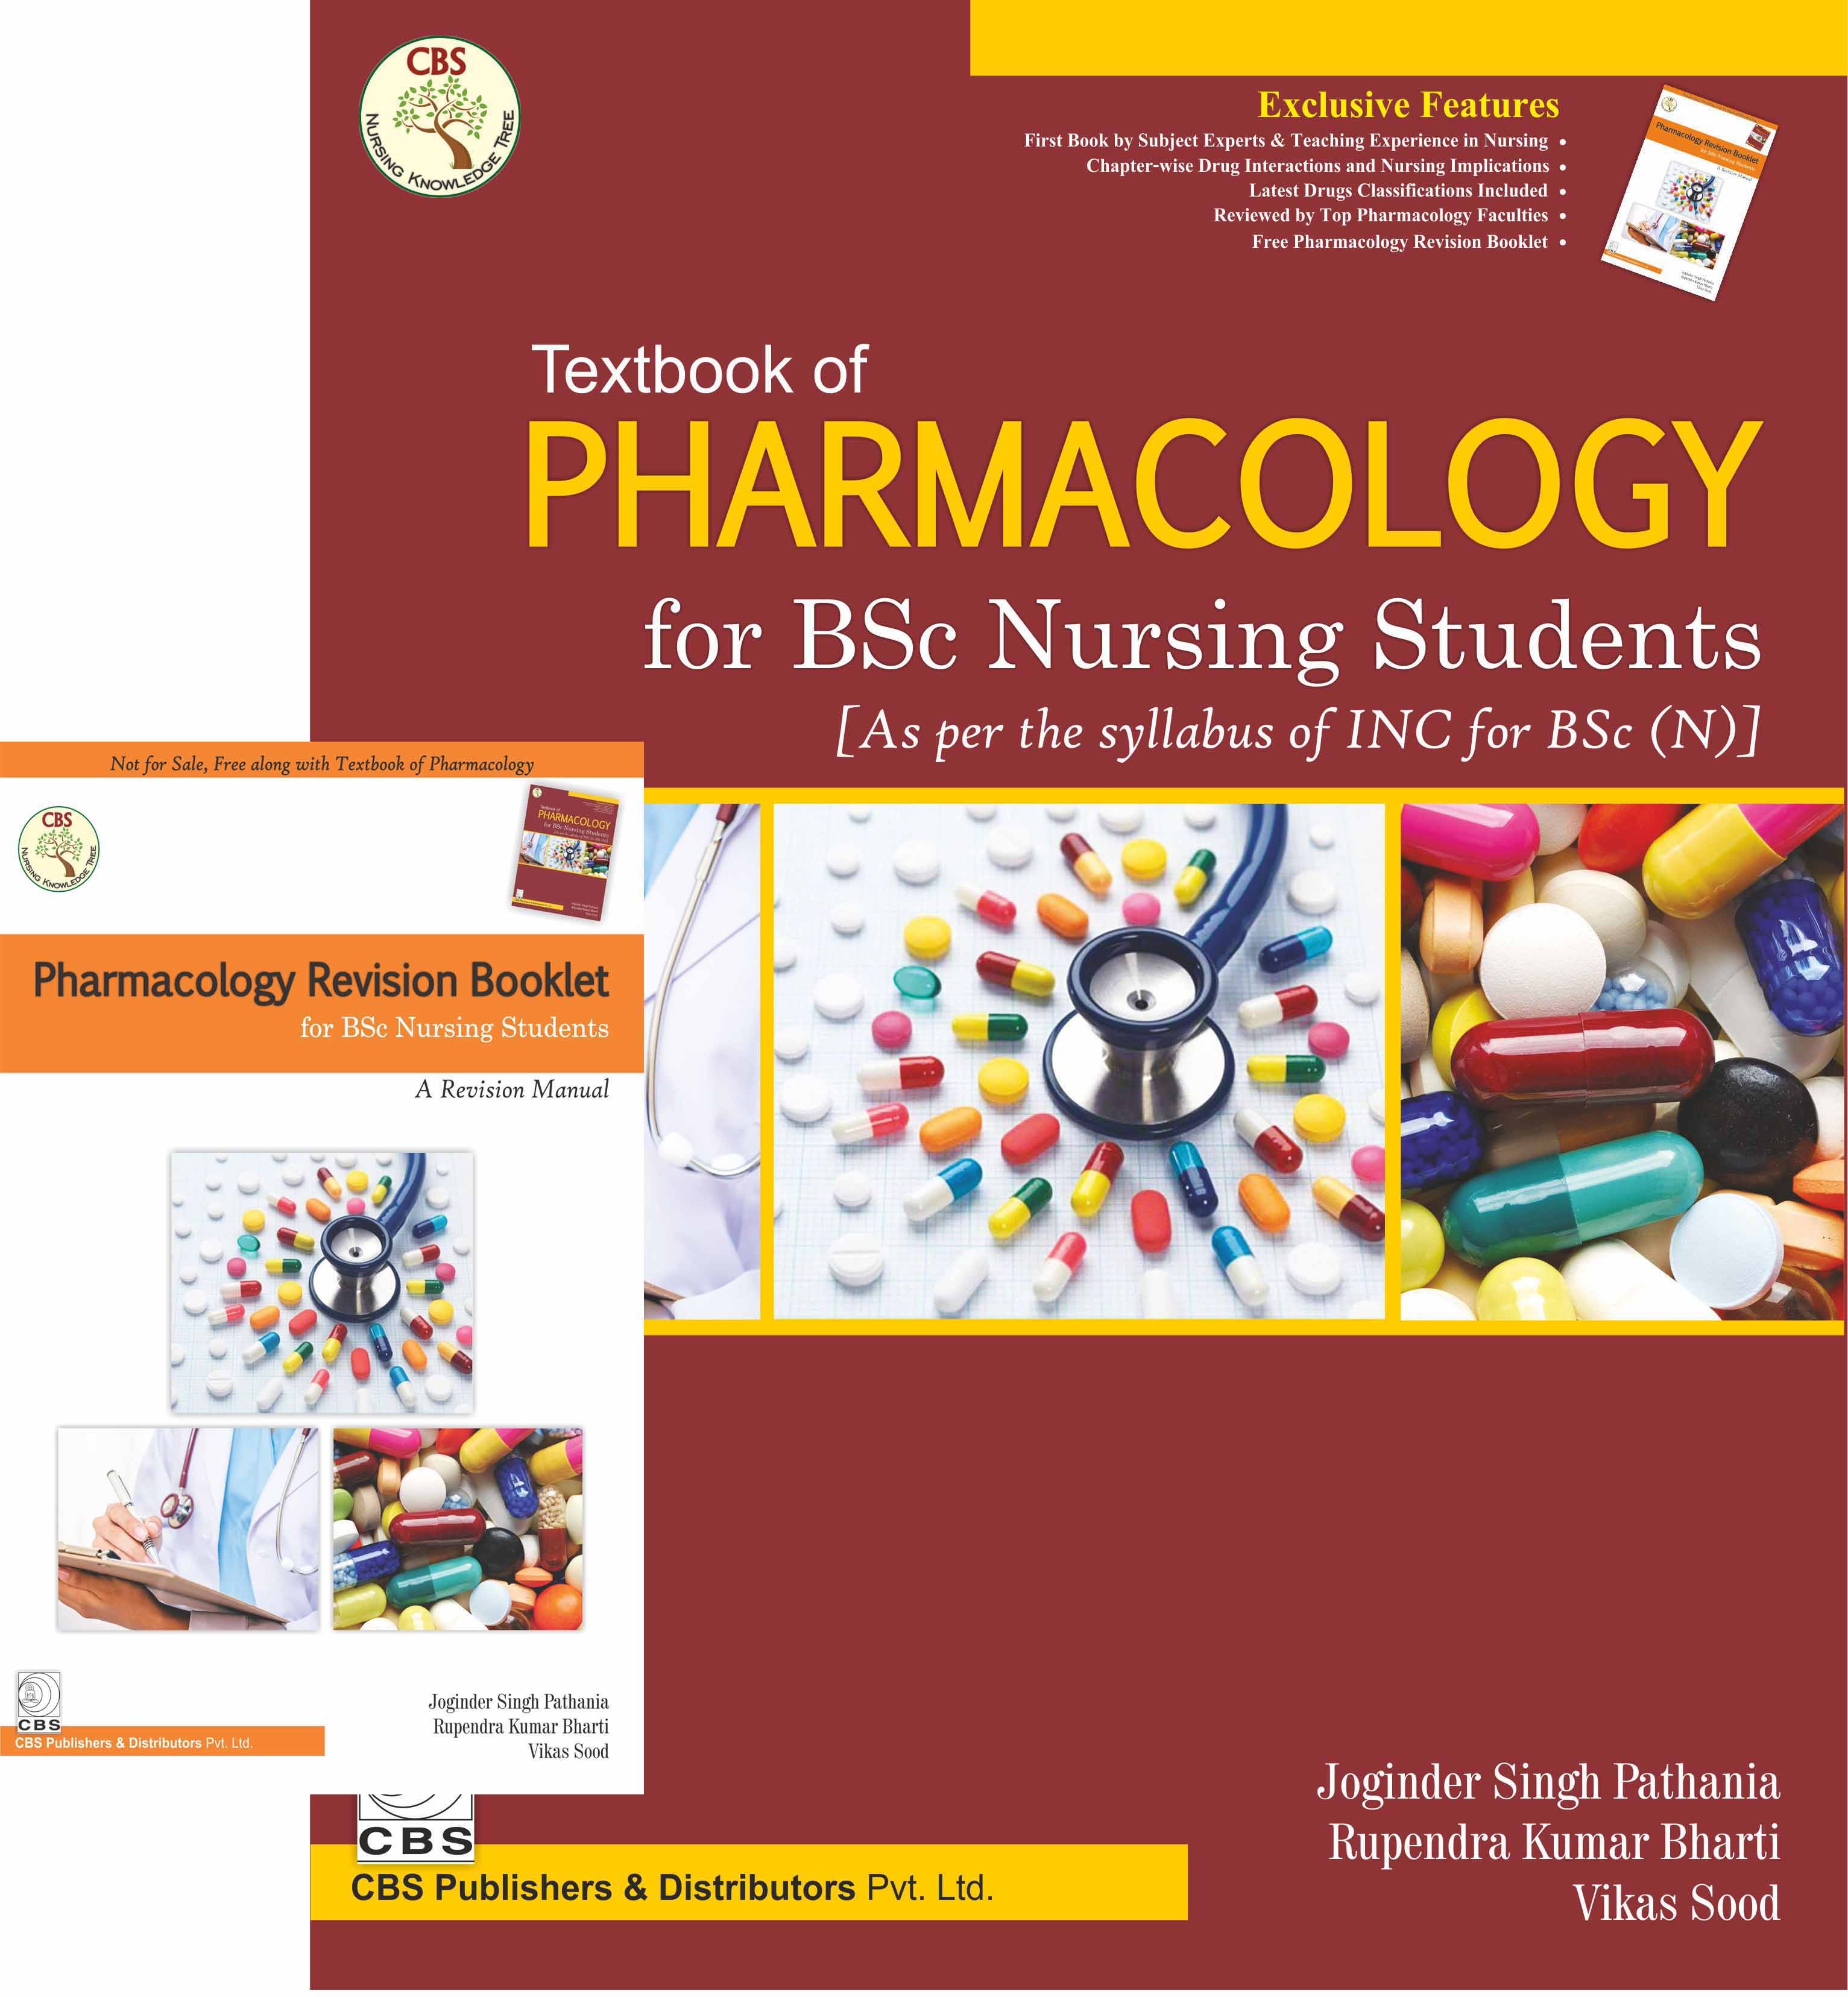 Textbook Of Pharmacology For Bsc Nursing Students With Revision Booklet (Pb 2017)